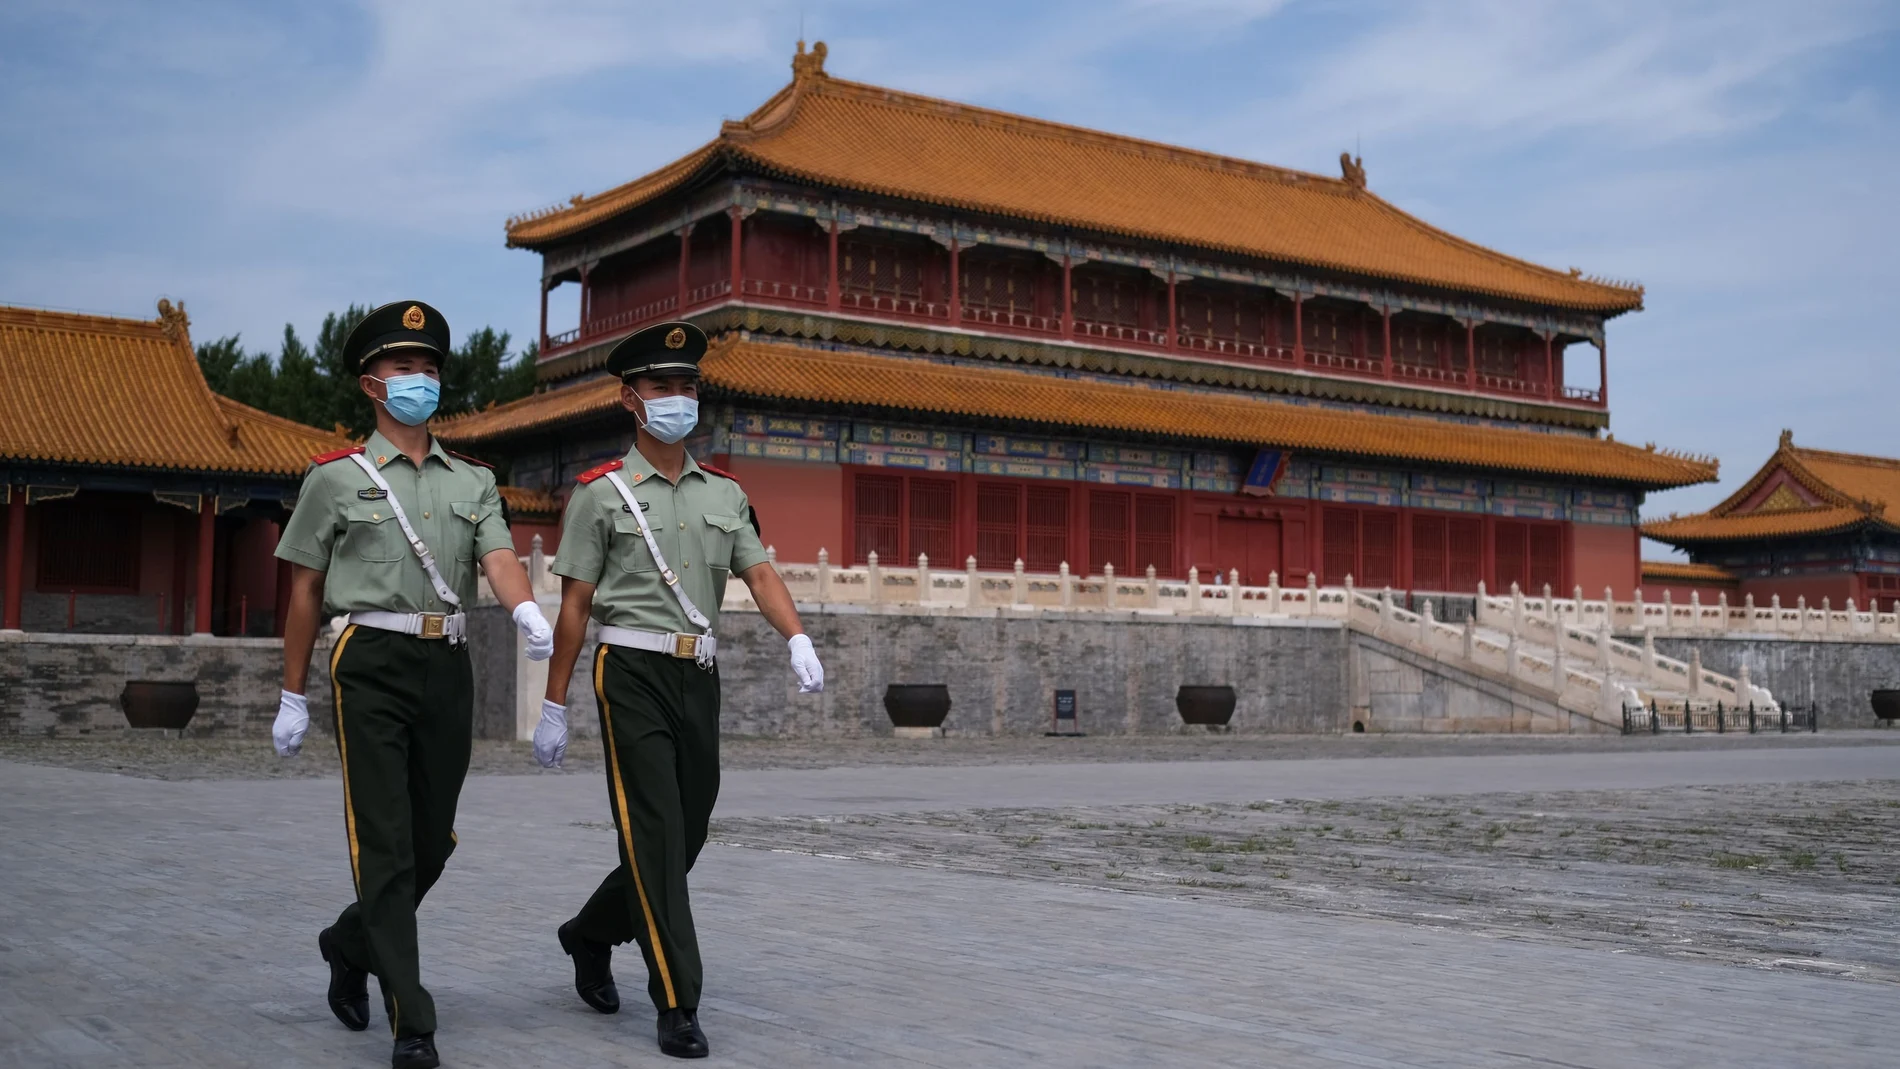 Paramilitary police officers wearing face masks walk at the Forbidden City following the outbreak of the coronavirus disease (COVID-19), in Beijing